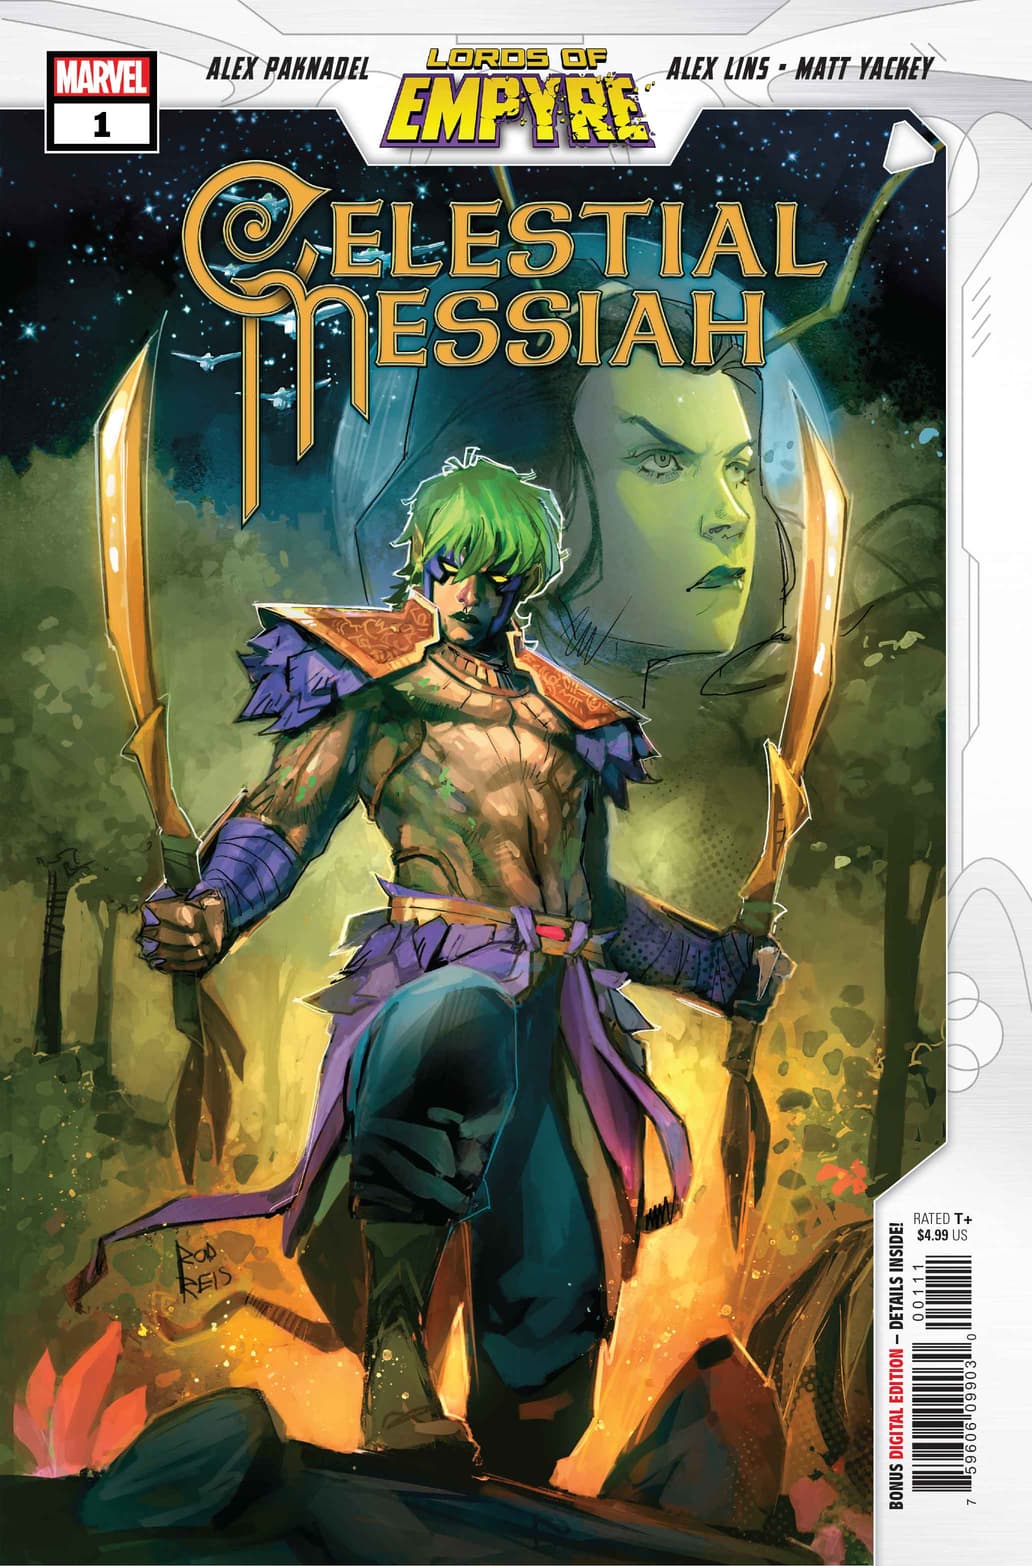 LORDS OF EMPYRE: CELESTIAL MESSIAH #1